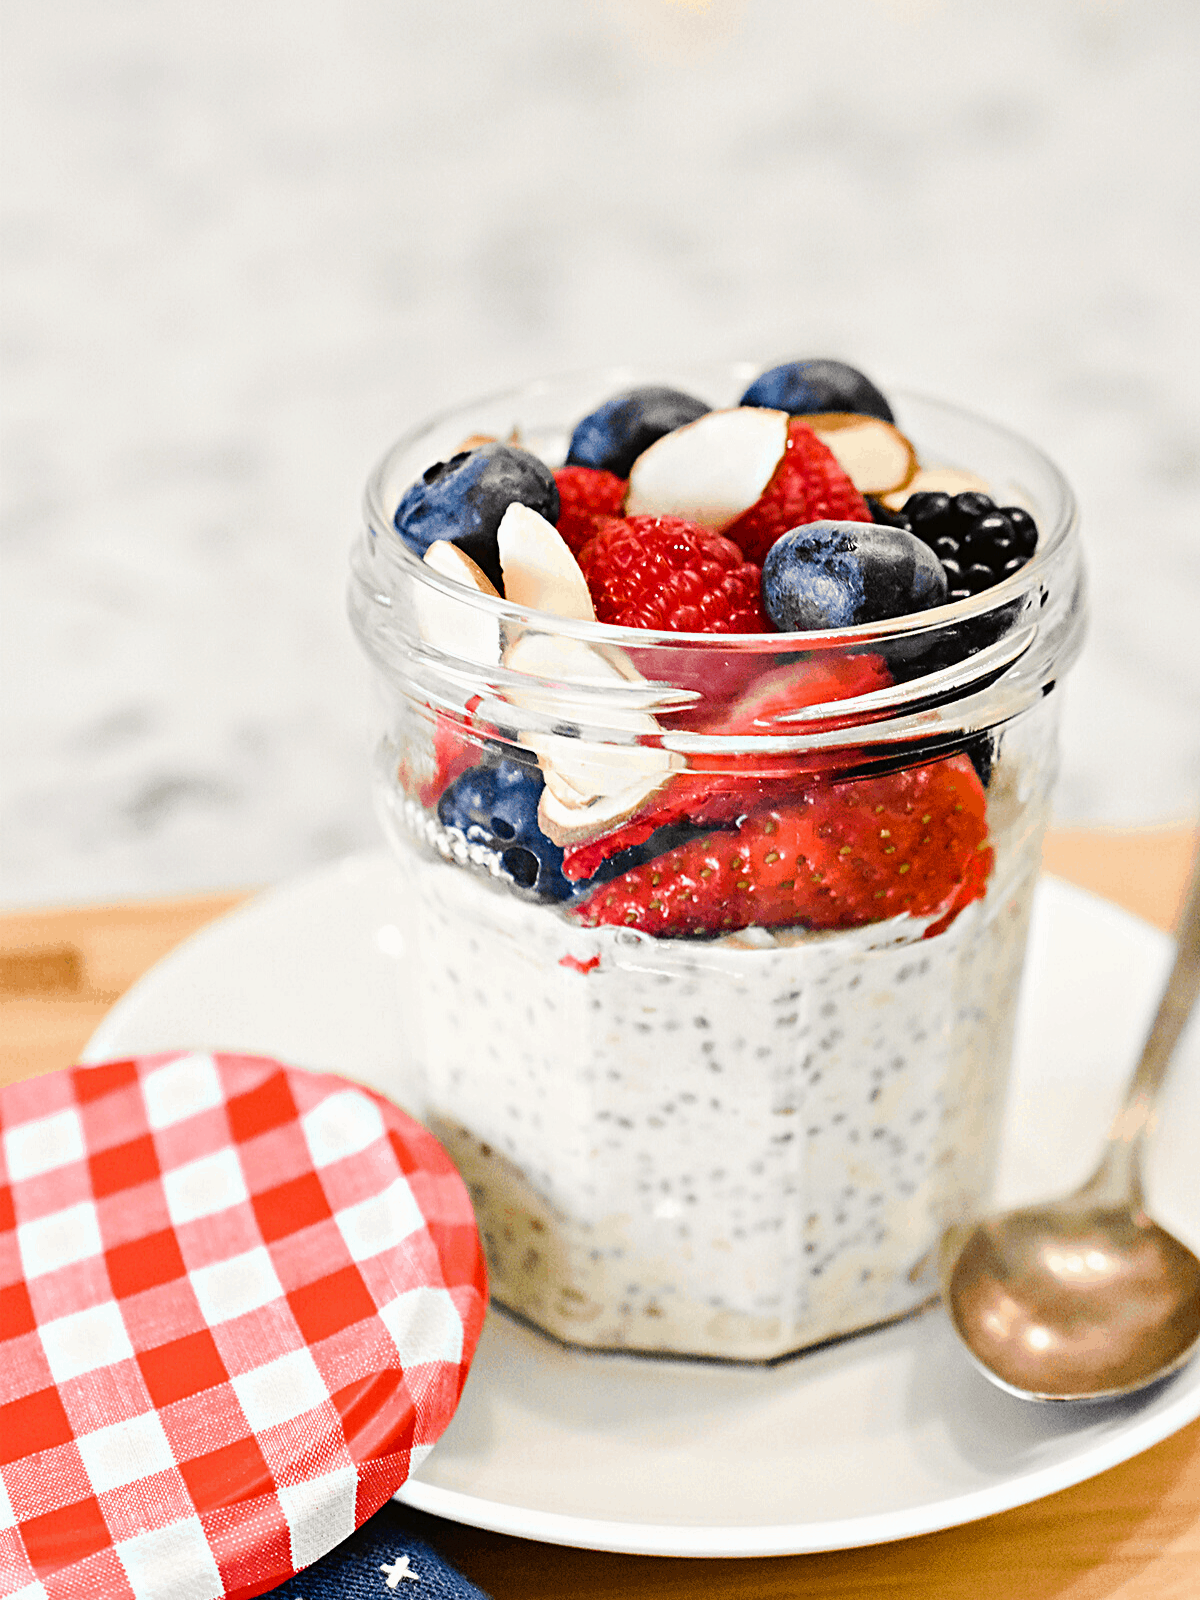 Overnight oats in a glass jar, topped with mixed berries and sliced almonds.